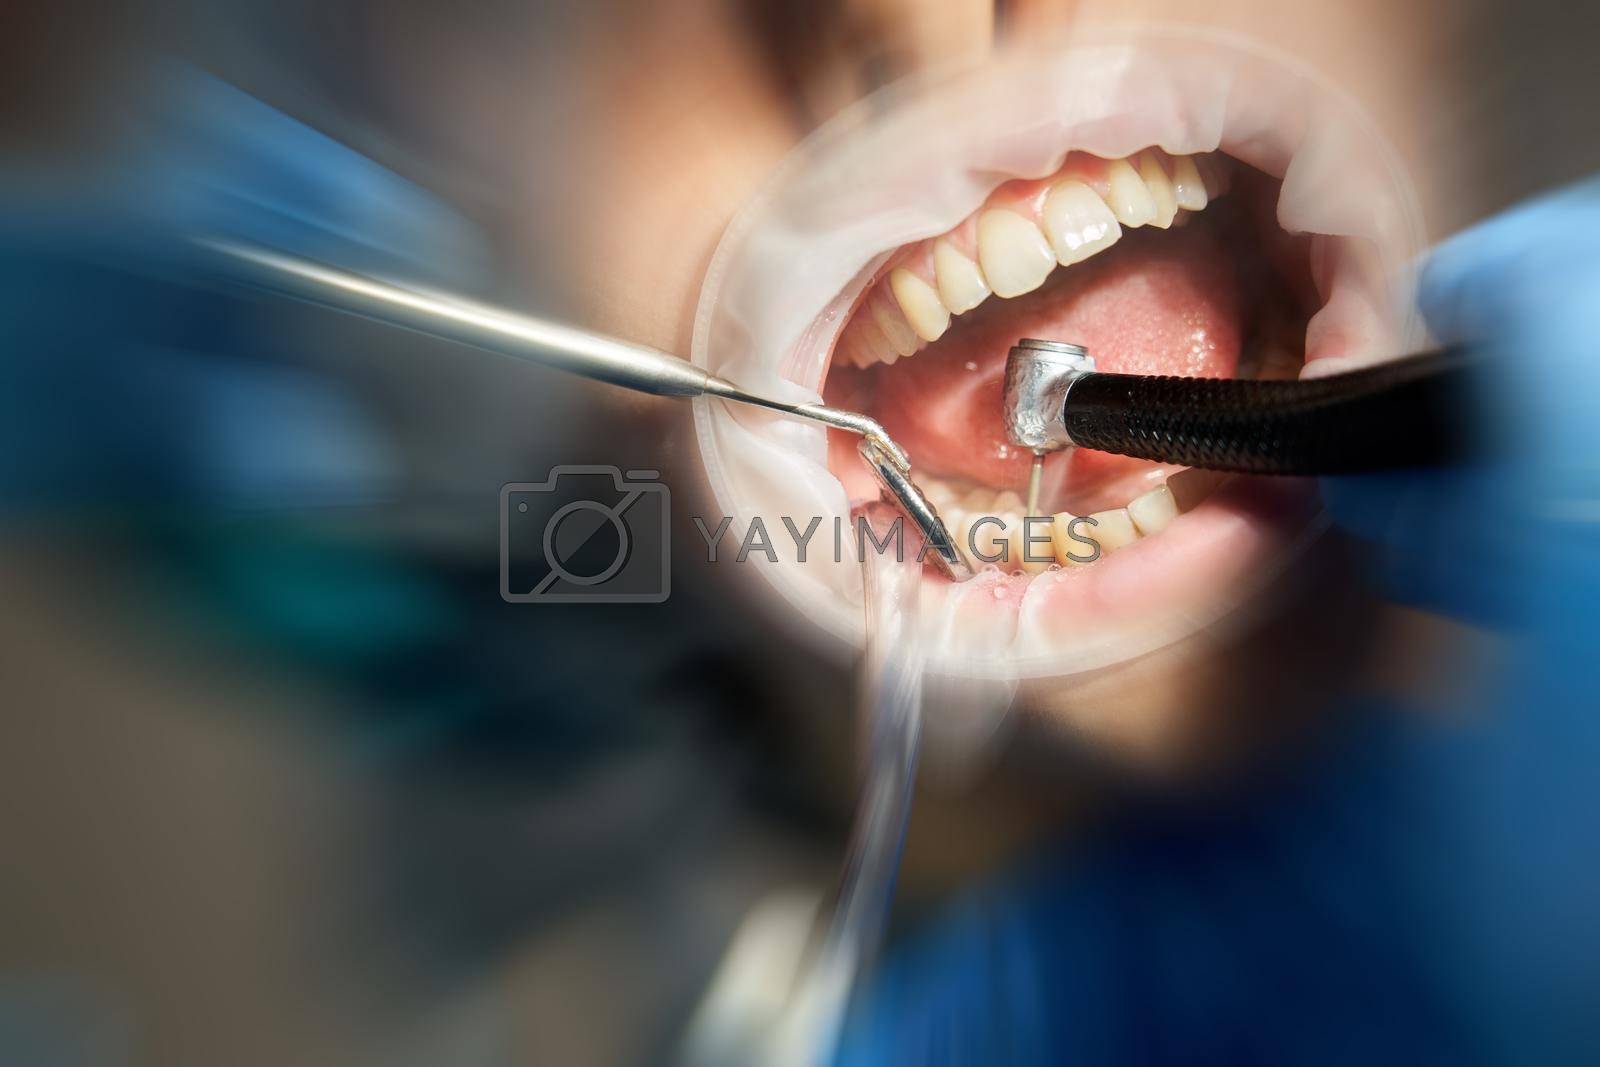 Royalty free image of dentist drilling tooth to male patient in dental chair with motion blur effect by Mariakray